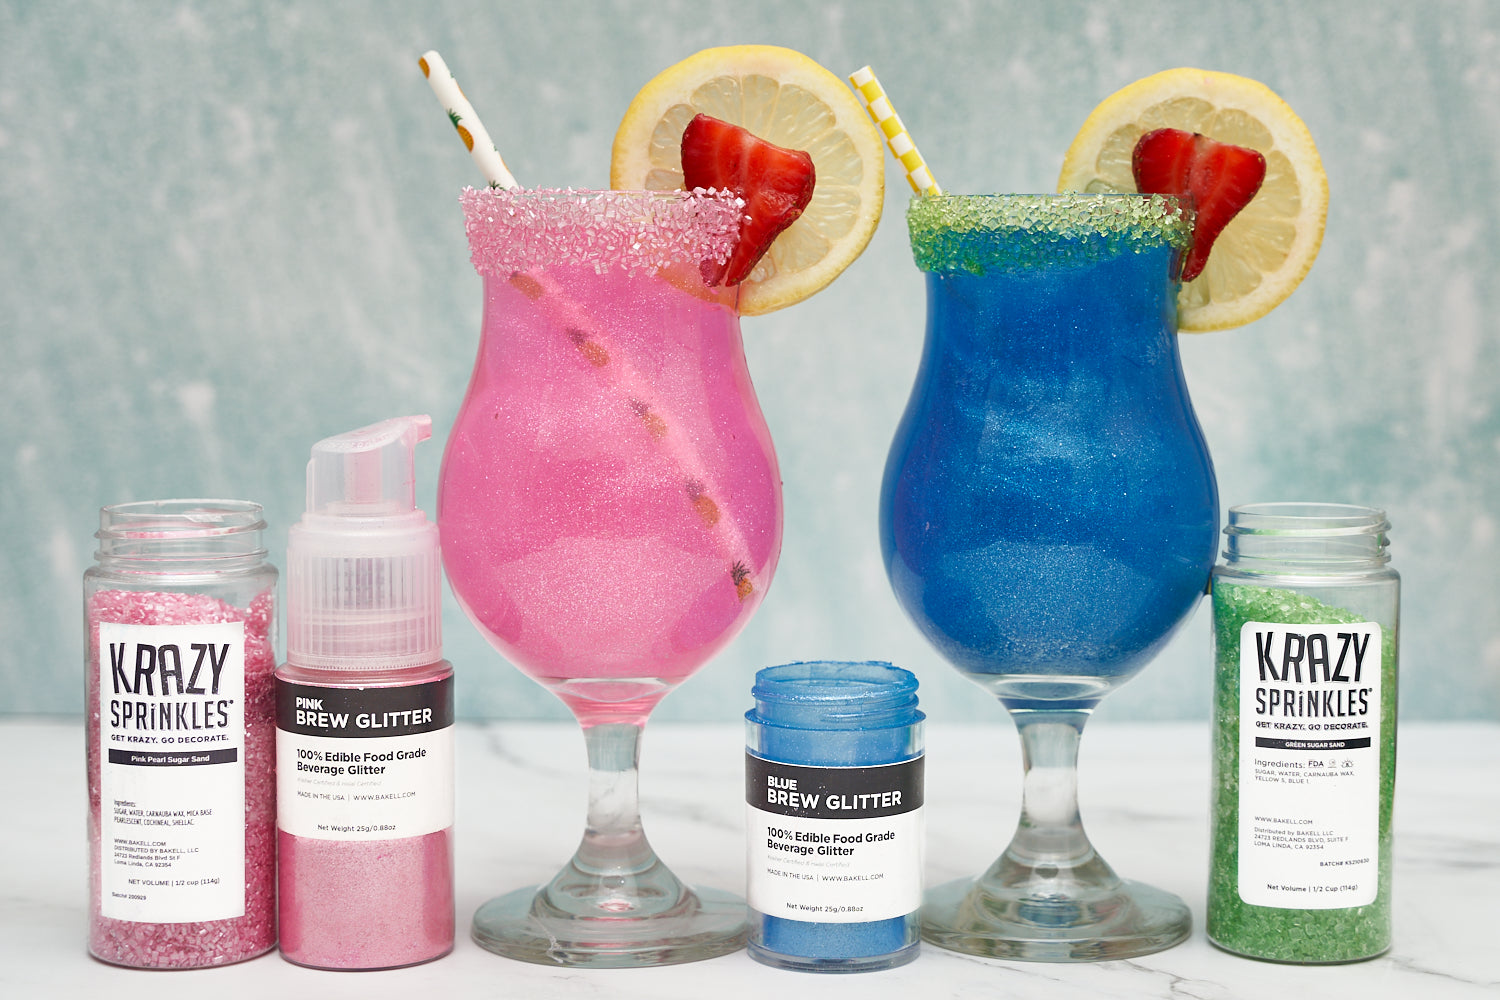 FDA approved drink glitter, 100% edible drink glitter, DIY shandy, pink drink glitter, blue drink glitter, DIY beer, edible drink glitter, sugar rim sand